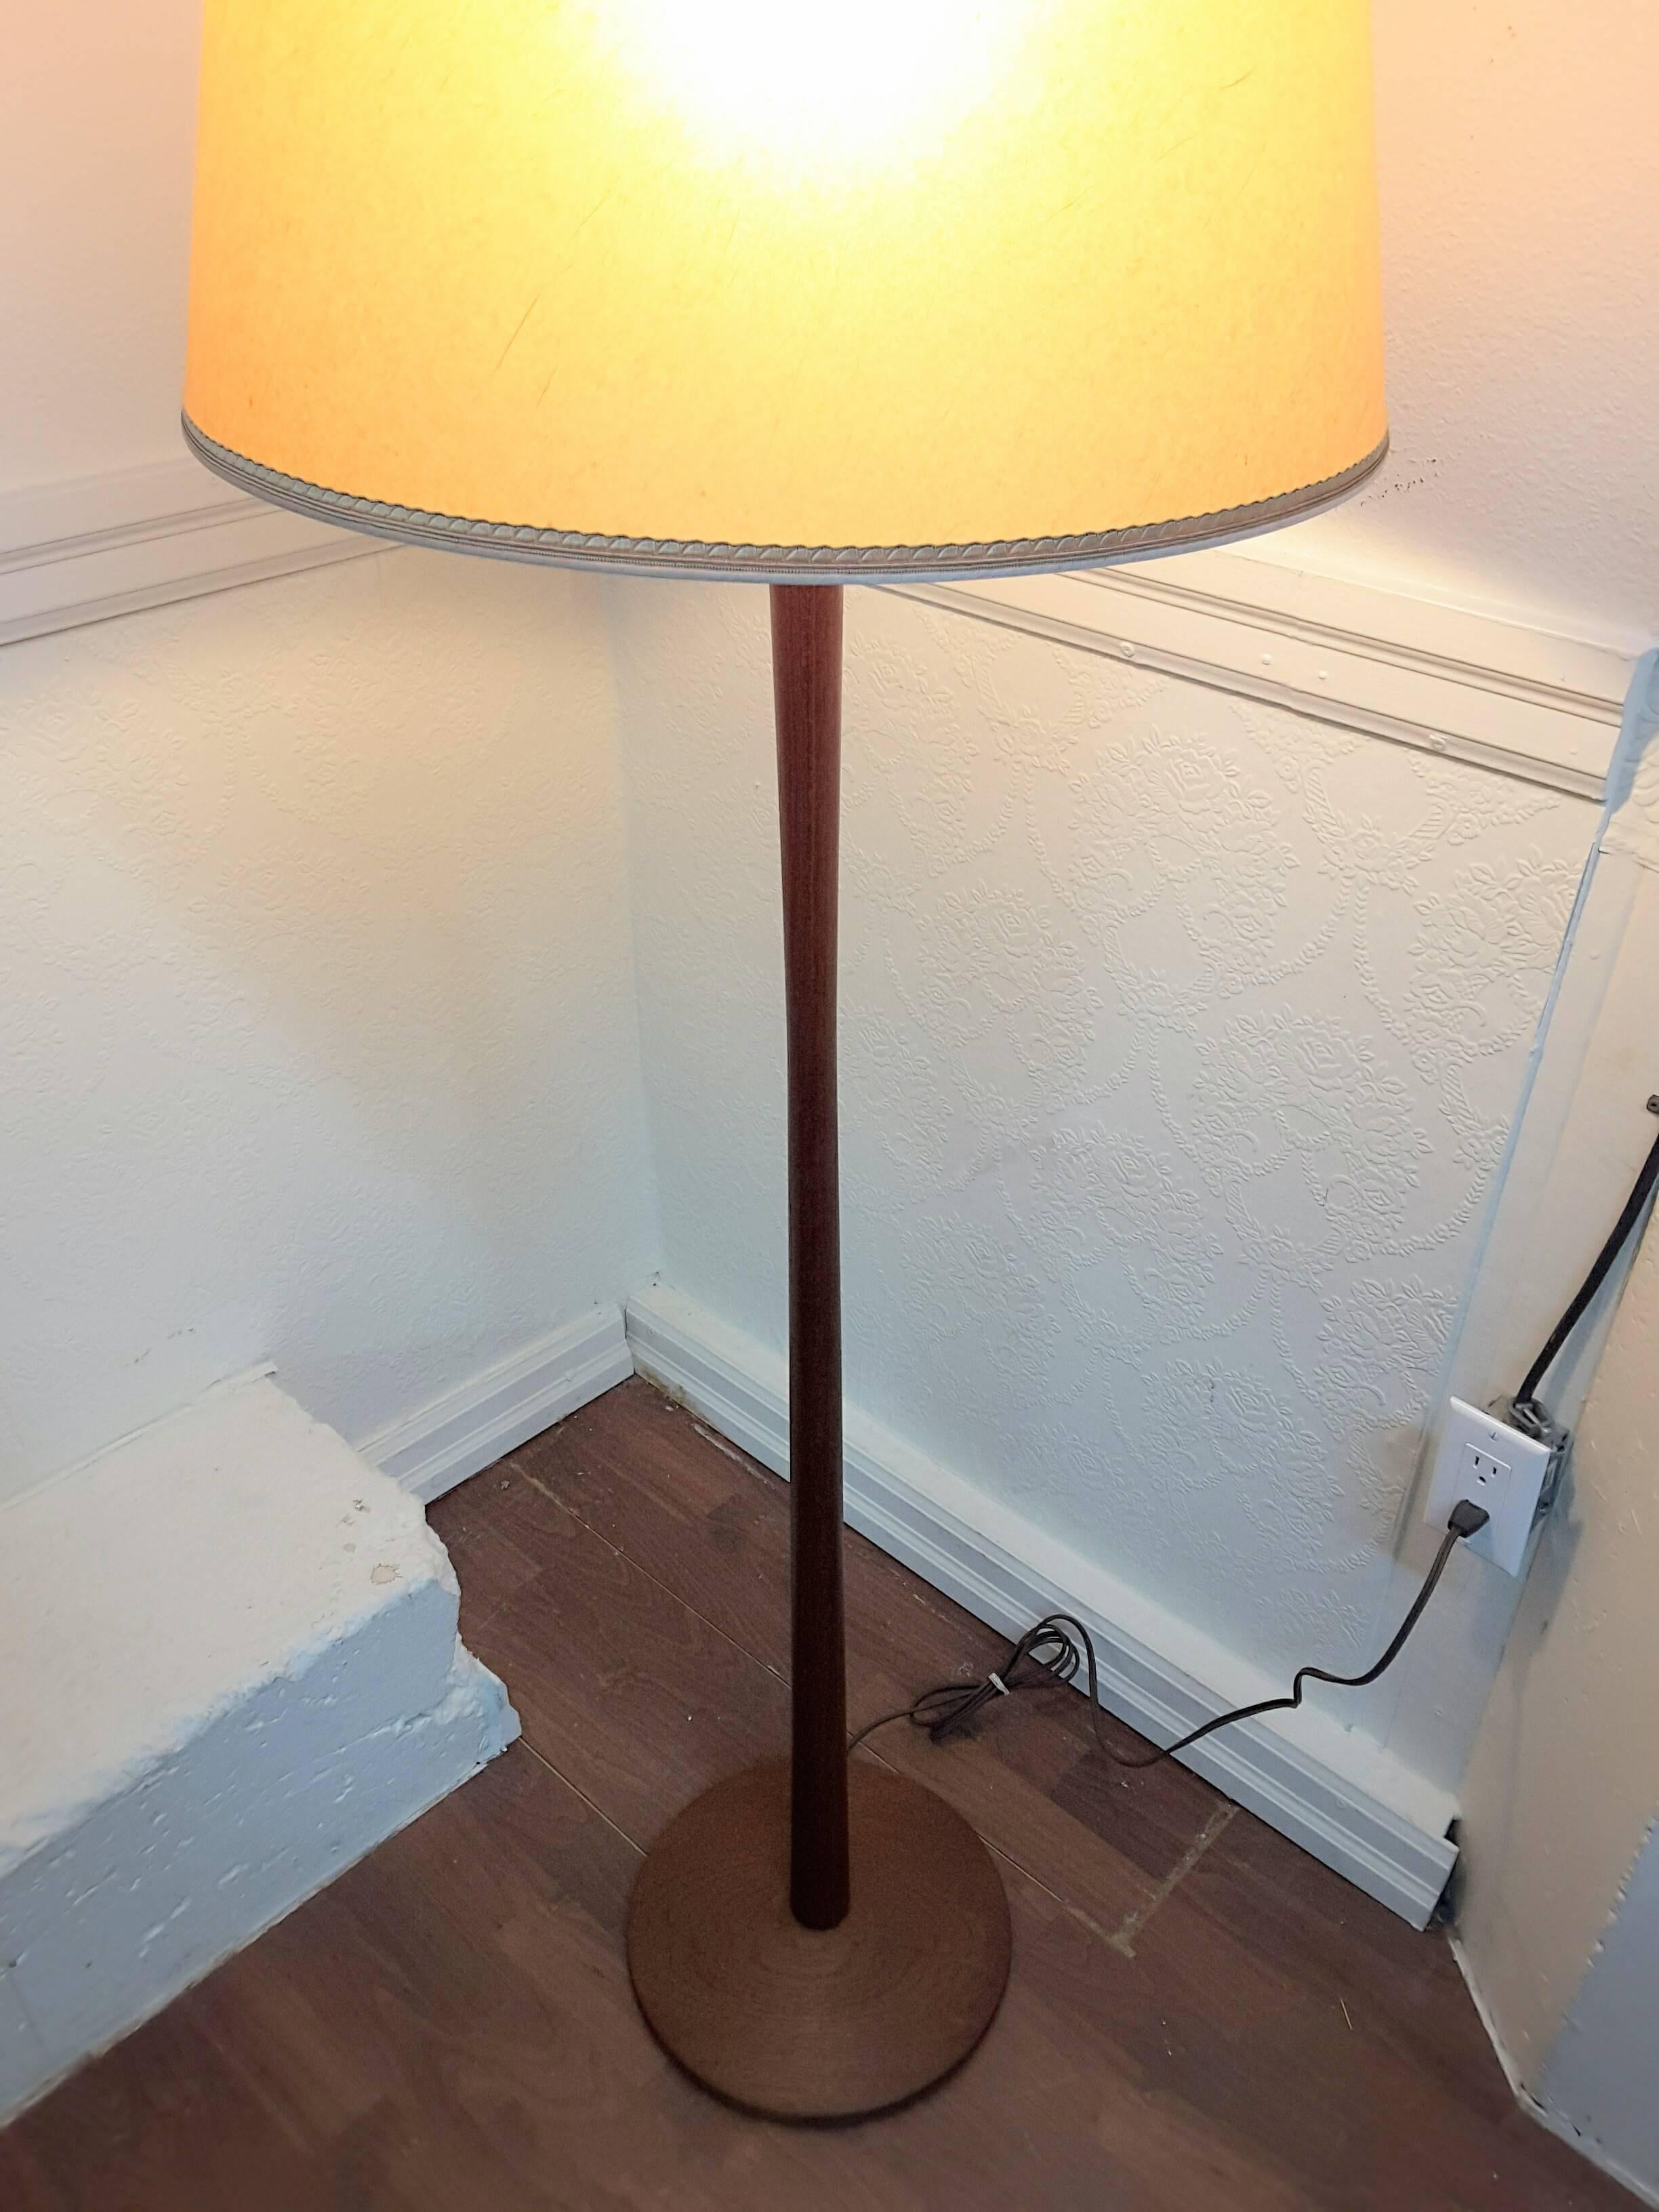 Mid-Century Danish teak floor lamp with a tapered column, on a round slightly coned base. The lamp measures 60